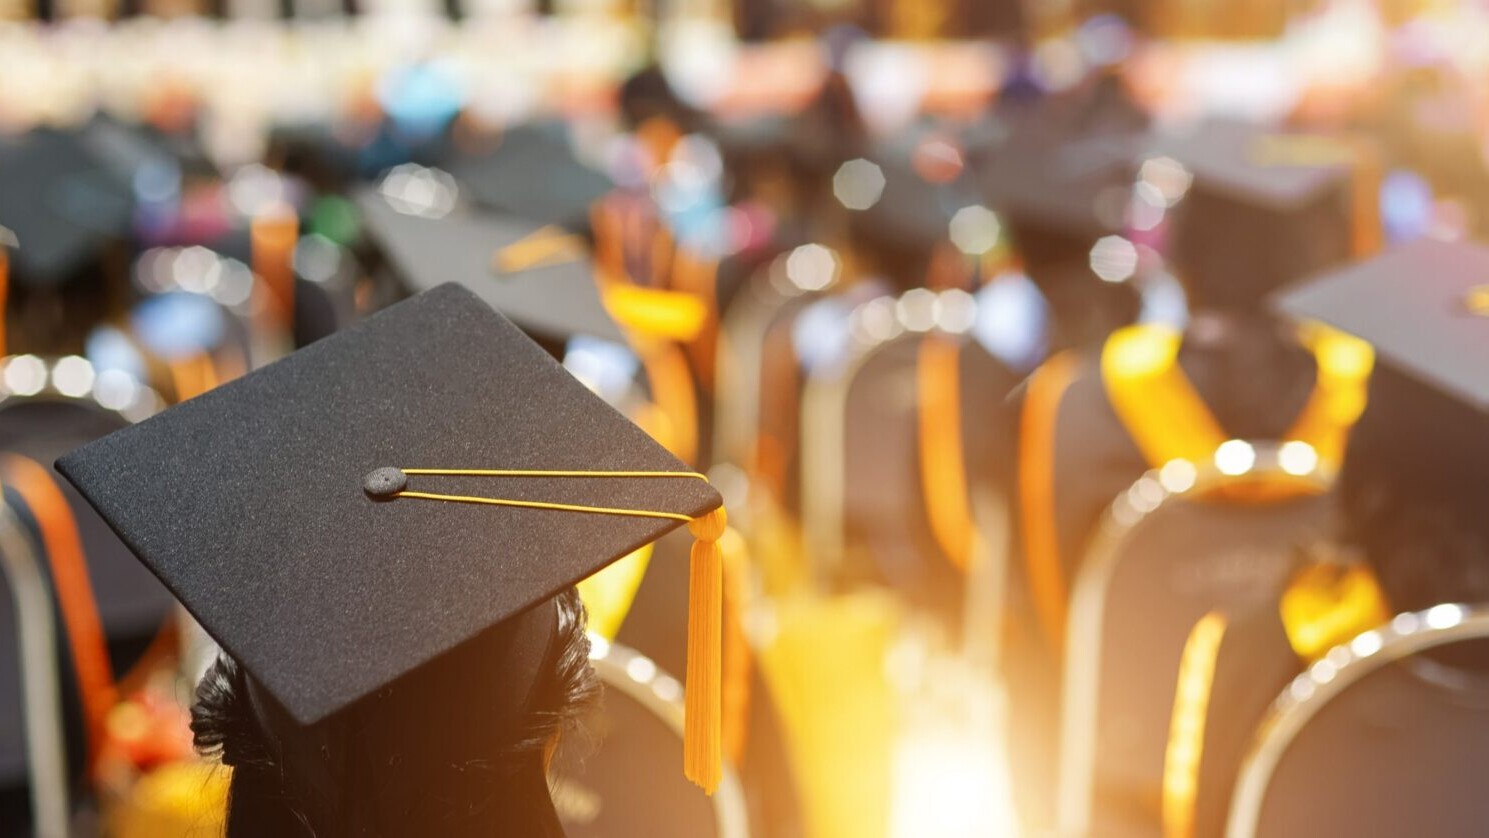 Rows of graduates, with a close-up of a cap.